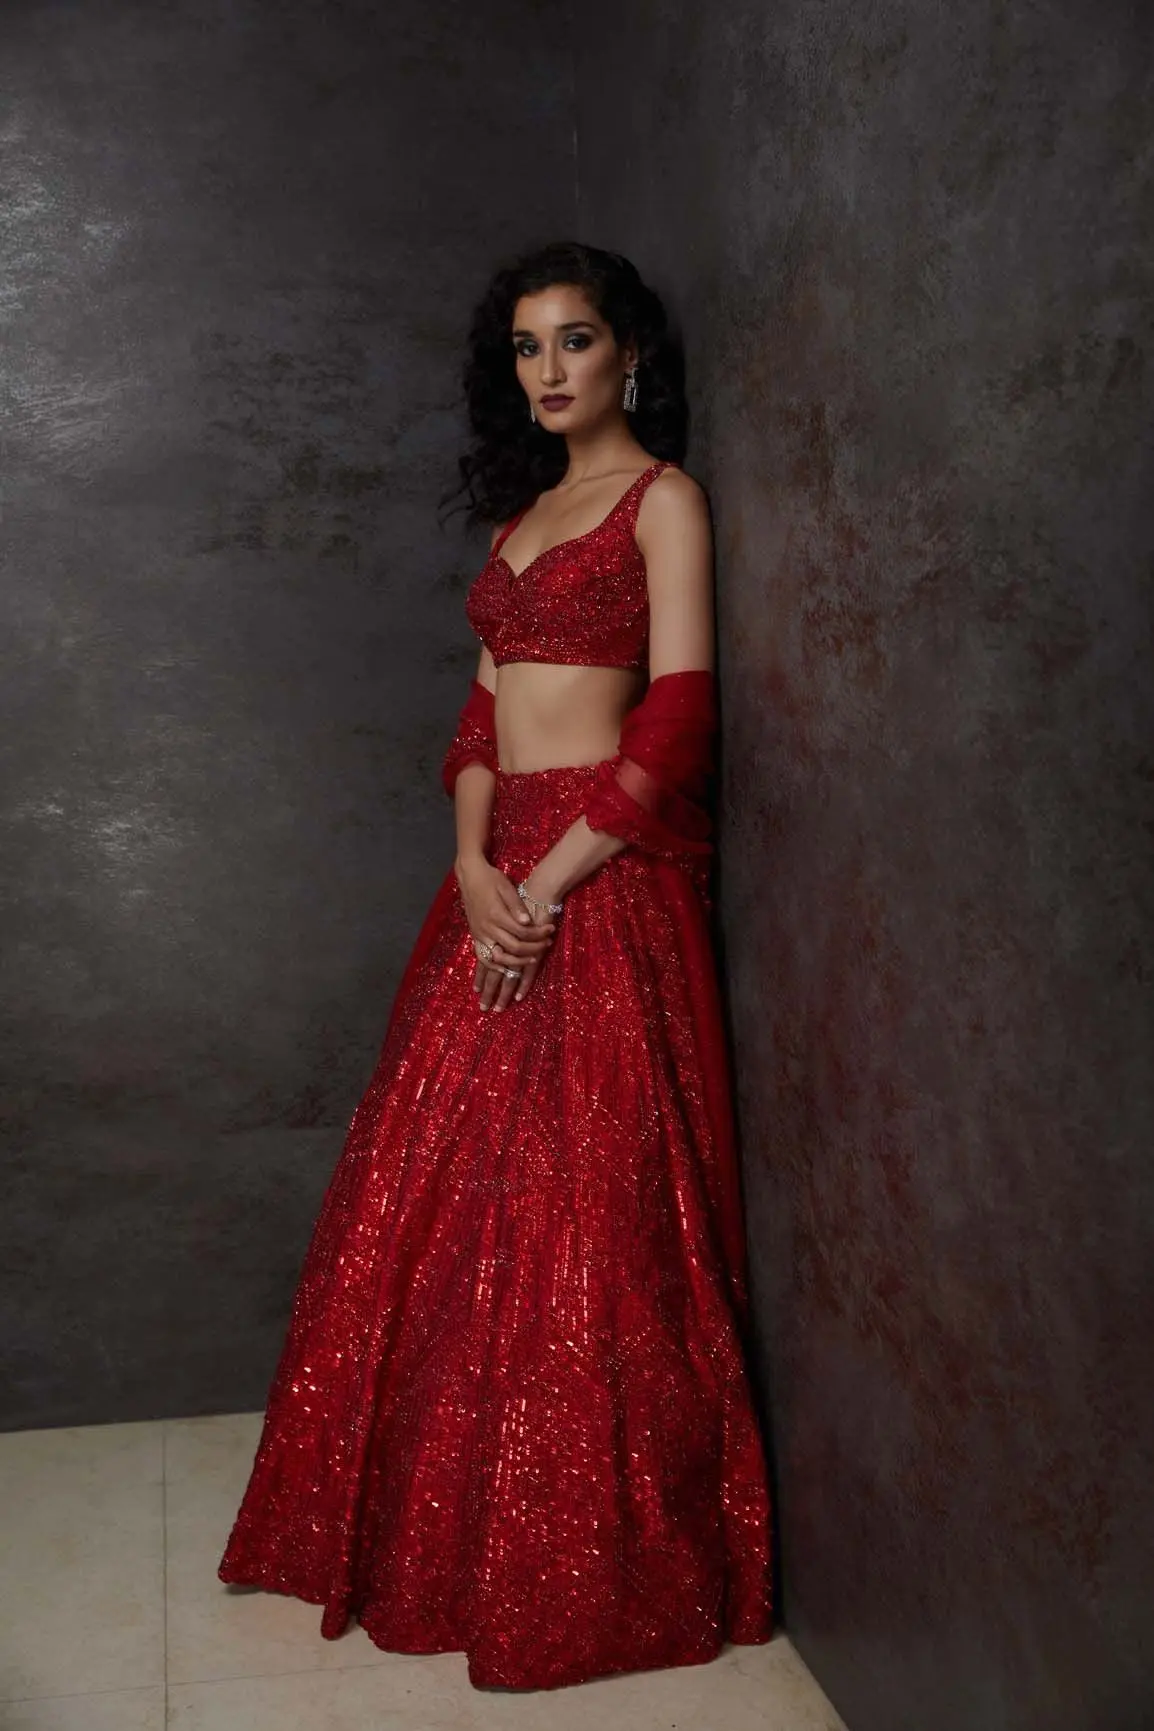 Glittery Sequin And Shimmer Lehengas Are Ruling 2022!